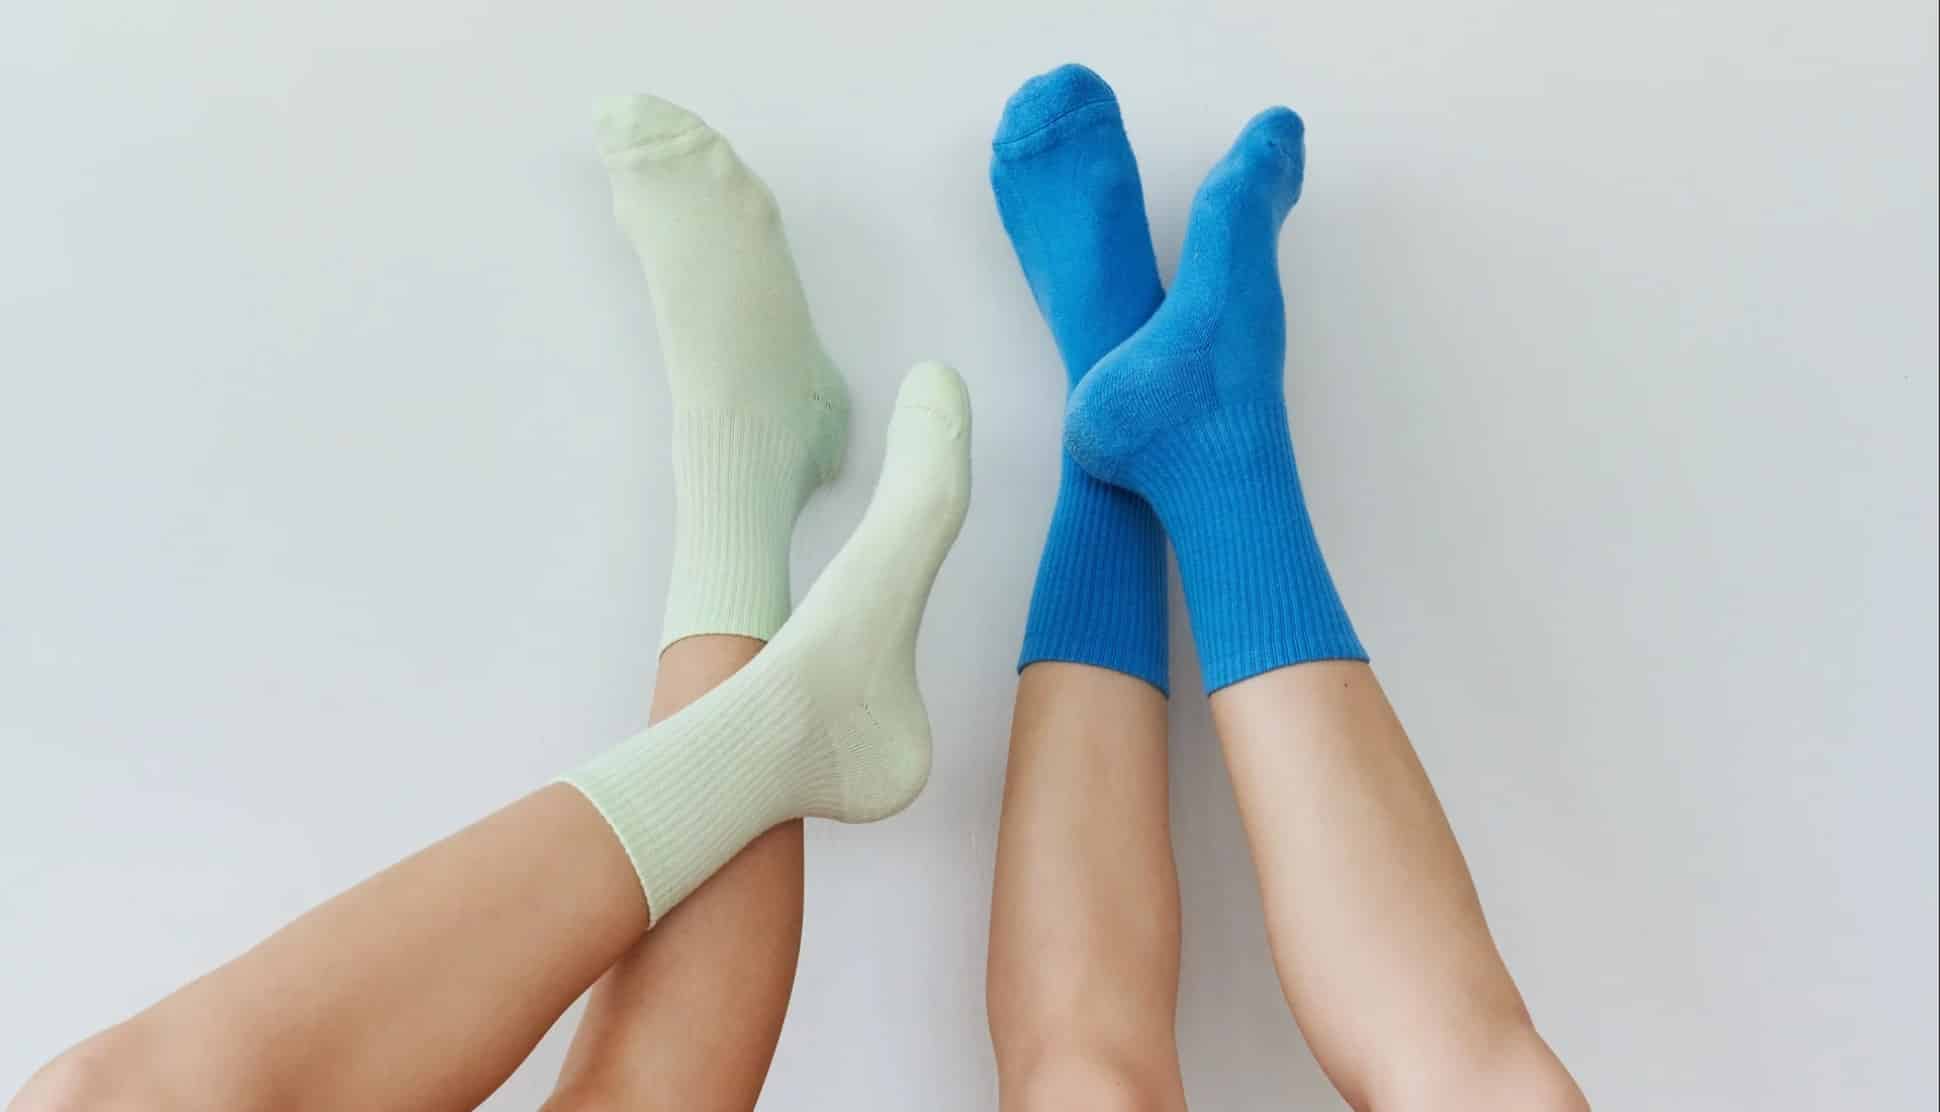 Stylish medical stocking for legs In Many Appealing Designs 